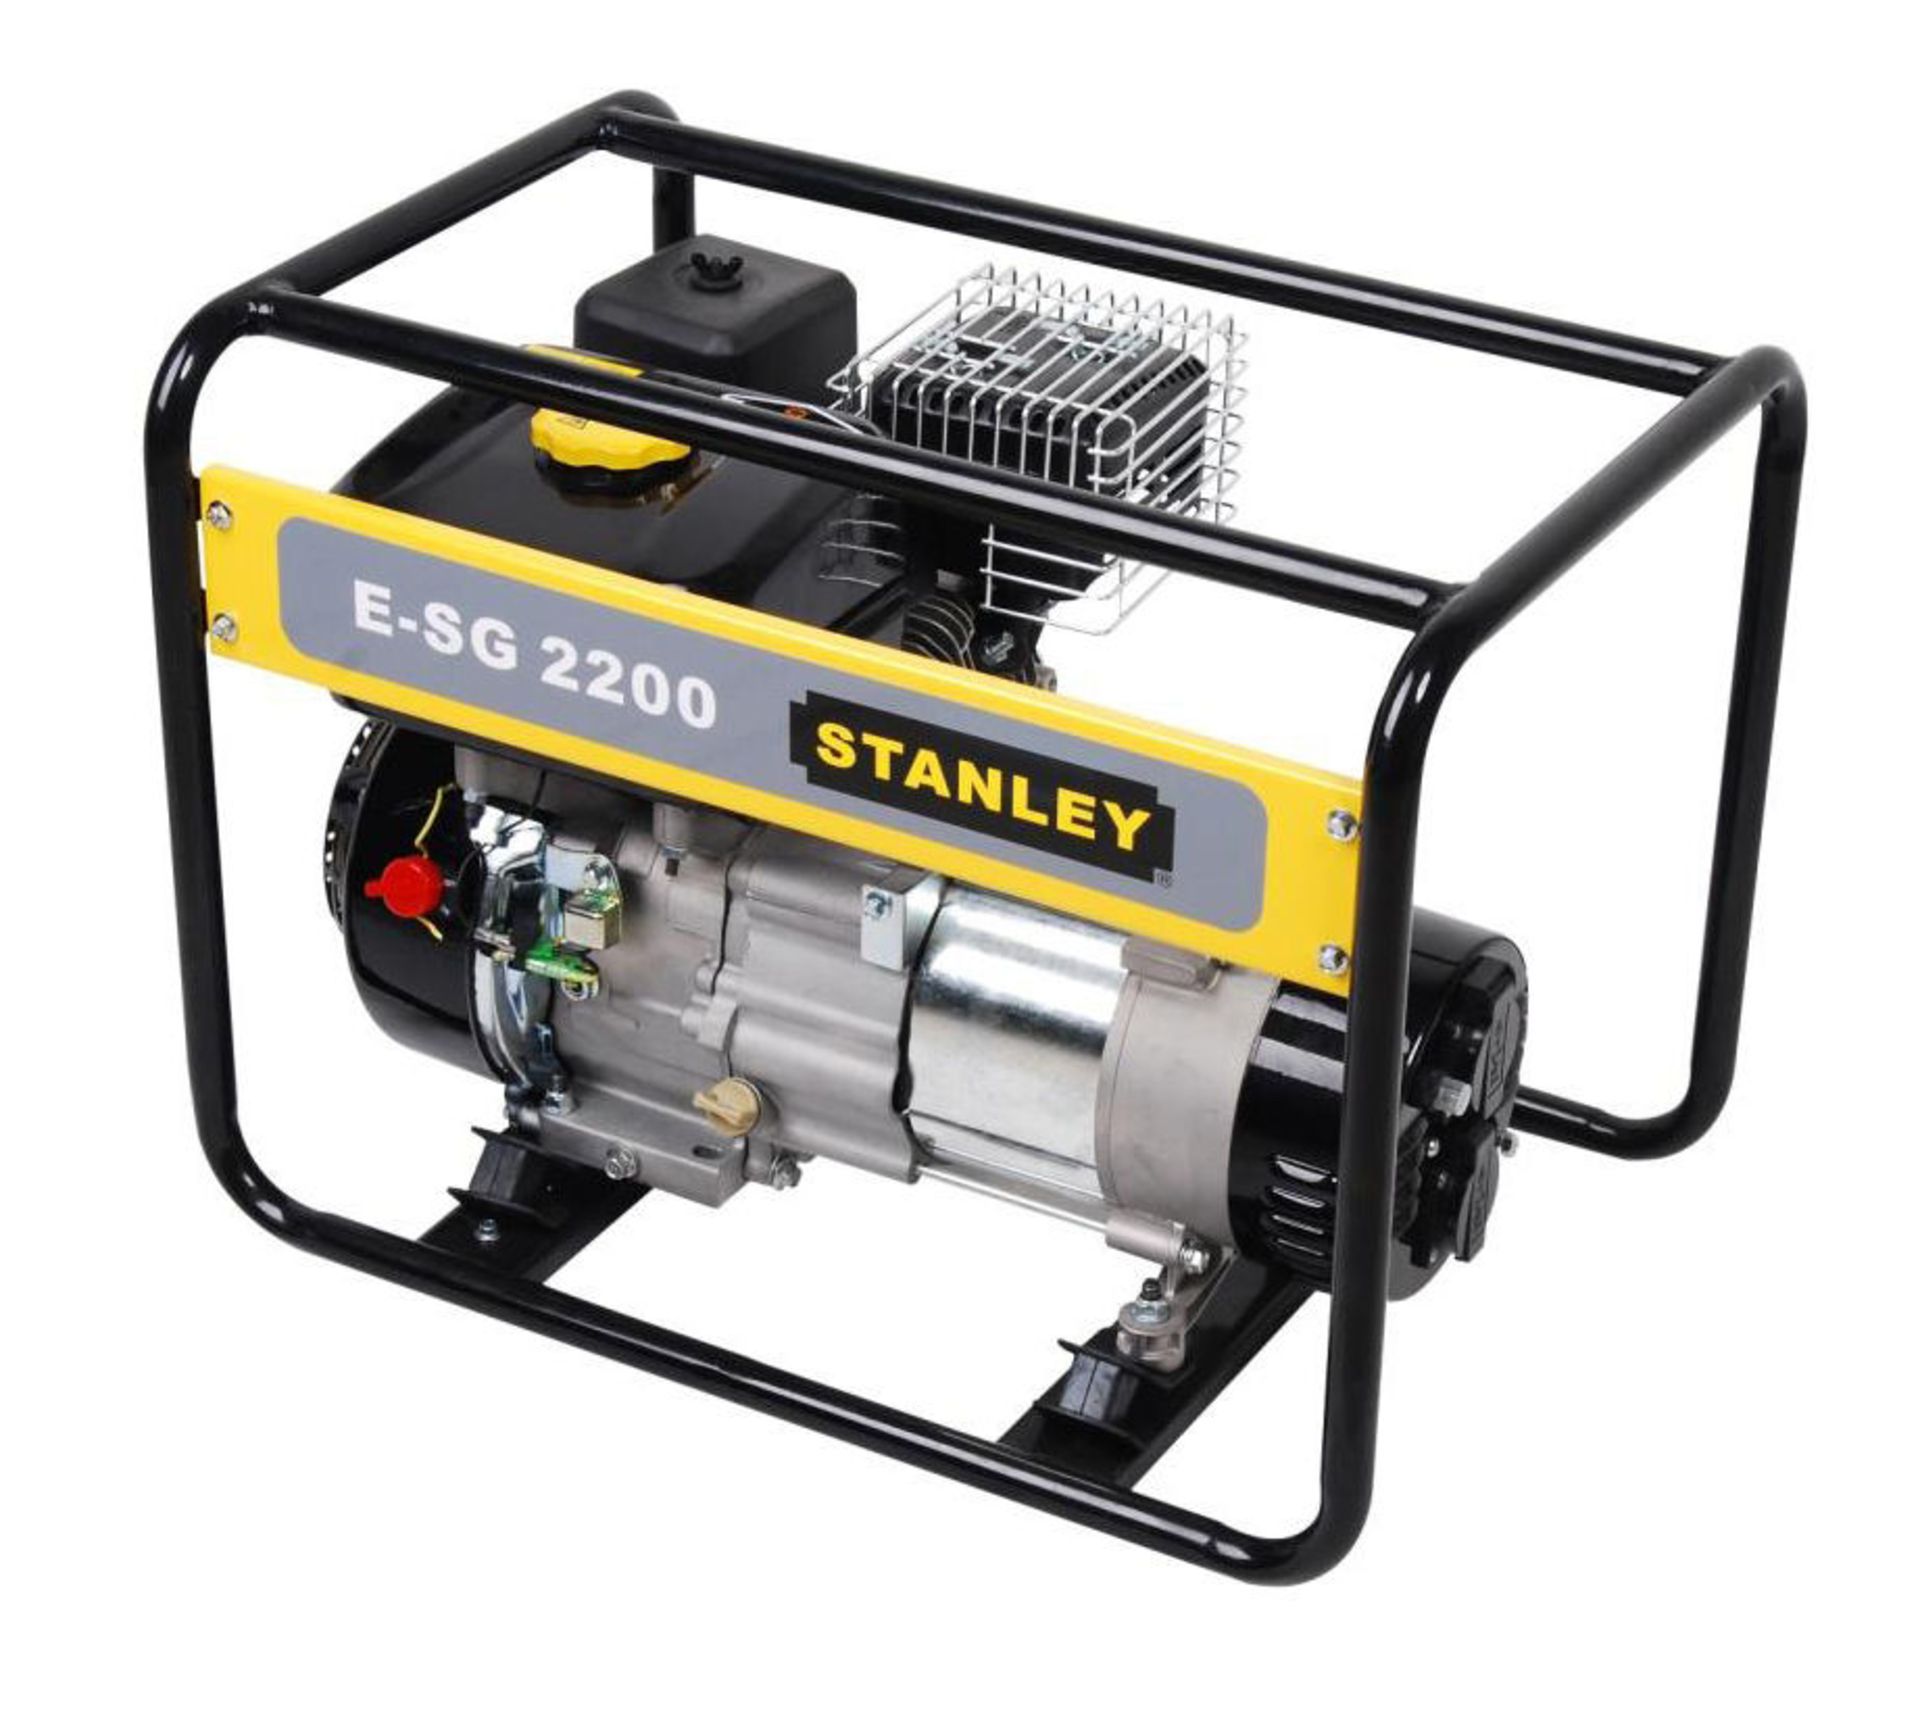 STANLEY E-SG-2000 2KW Generator without Shroud